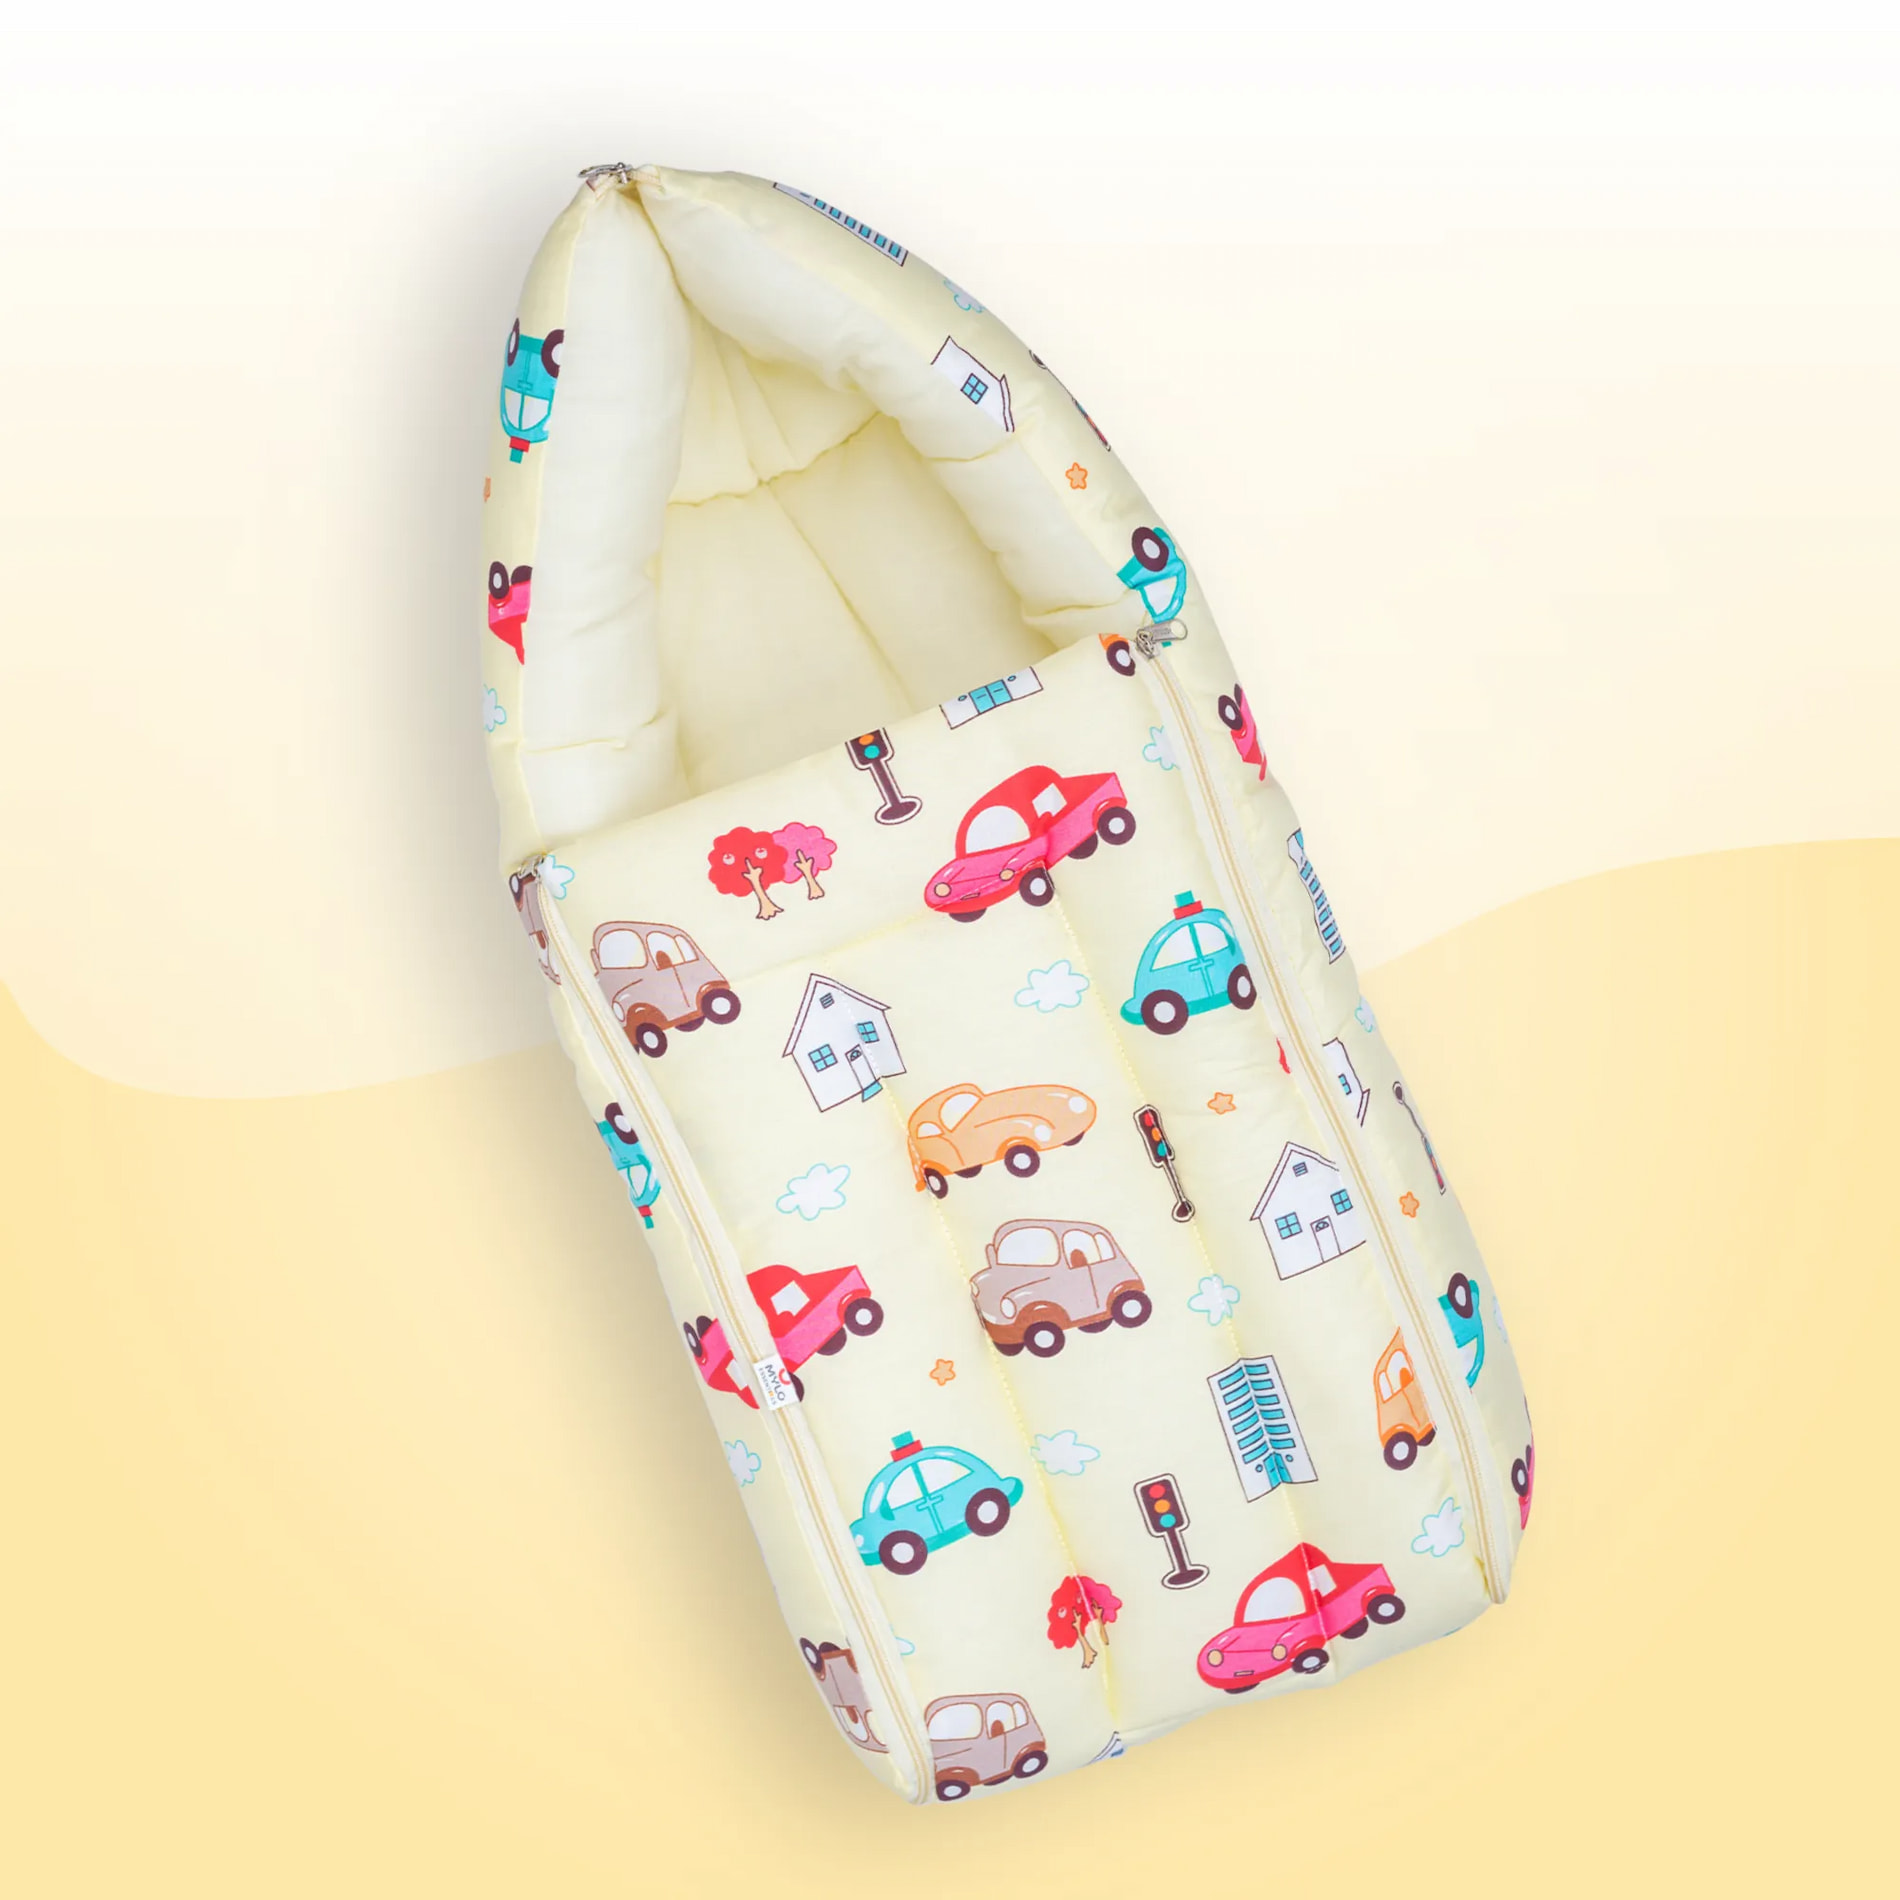 4–in-1 Soft & Snuggly Baby Sleeping Bag/ Carry Nest with 3-way Zip Opening- Kids Car